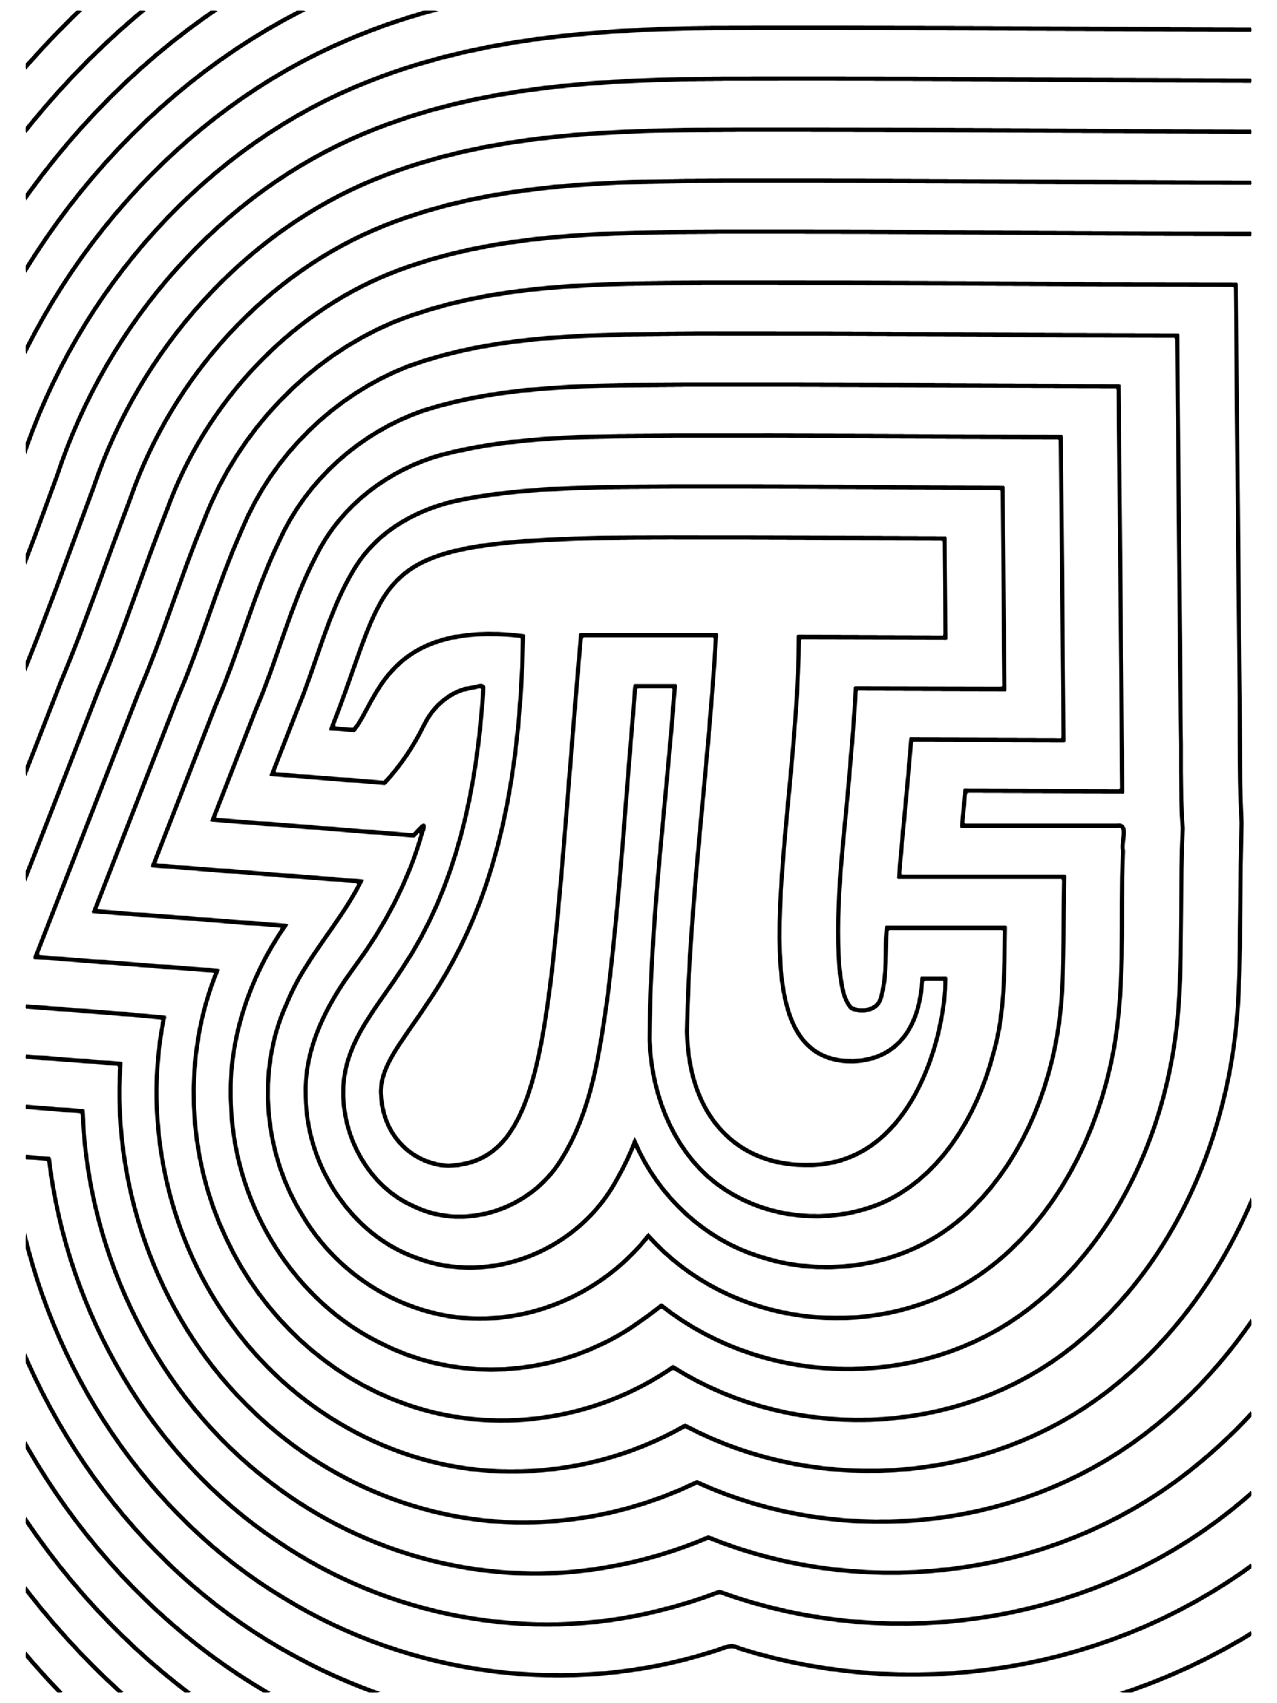 Happy pi day! coloring page Wallpaper